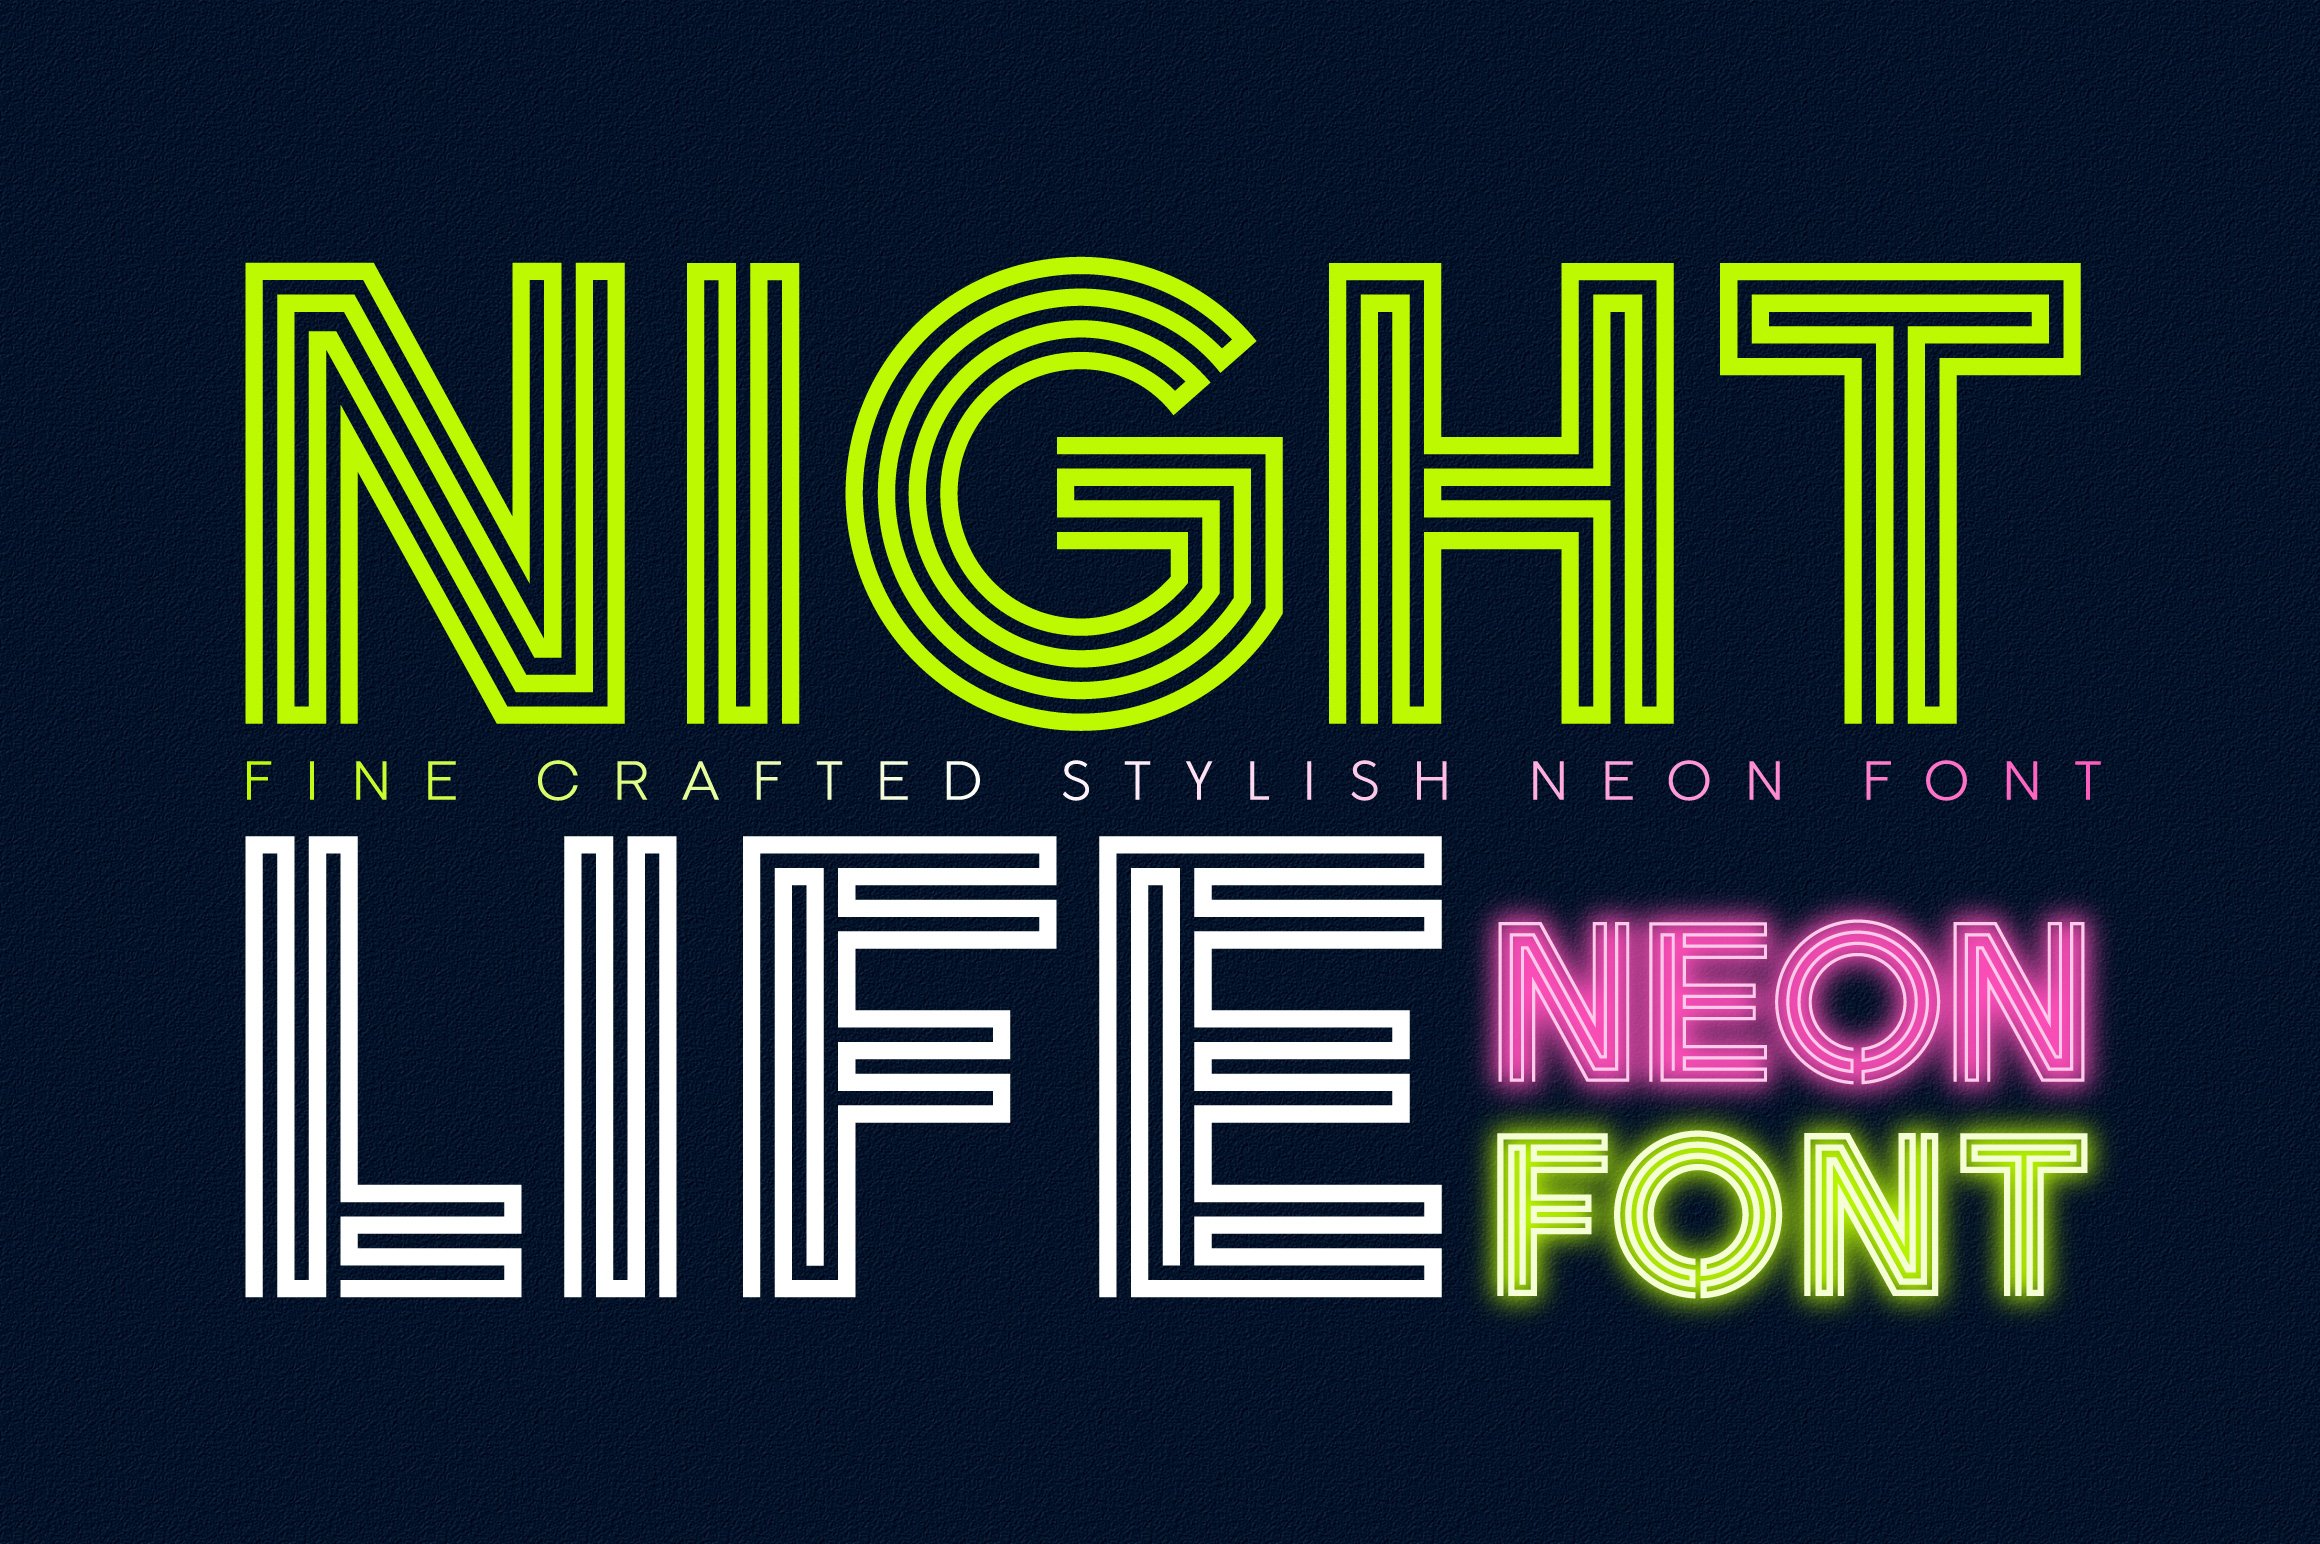 Nightlife Decorative Neon Font cover image.